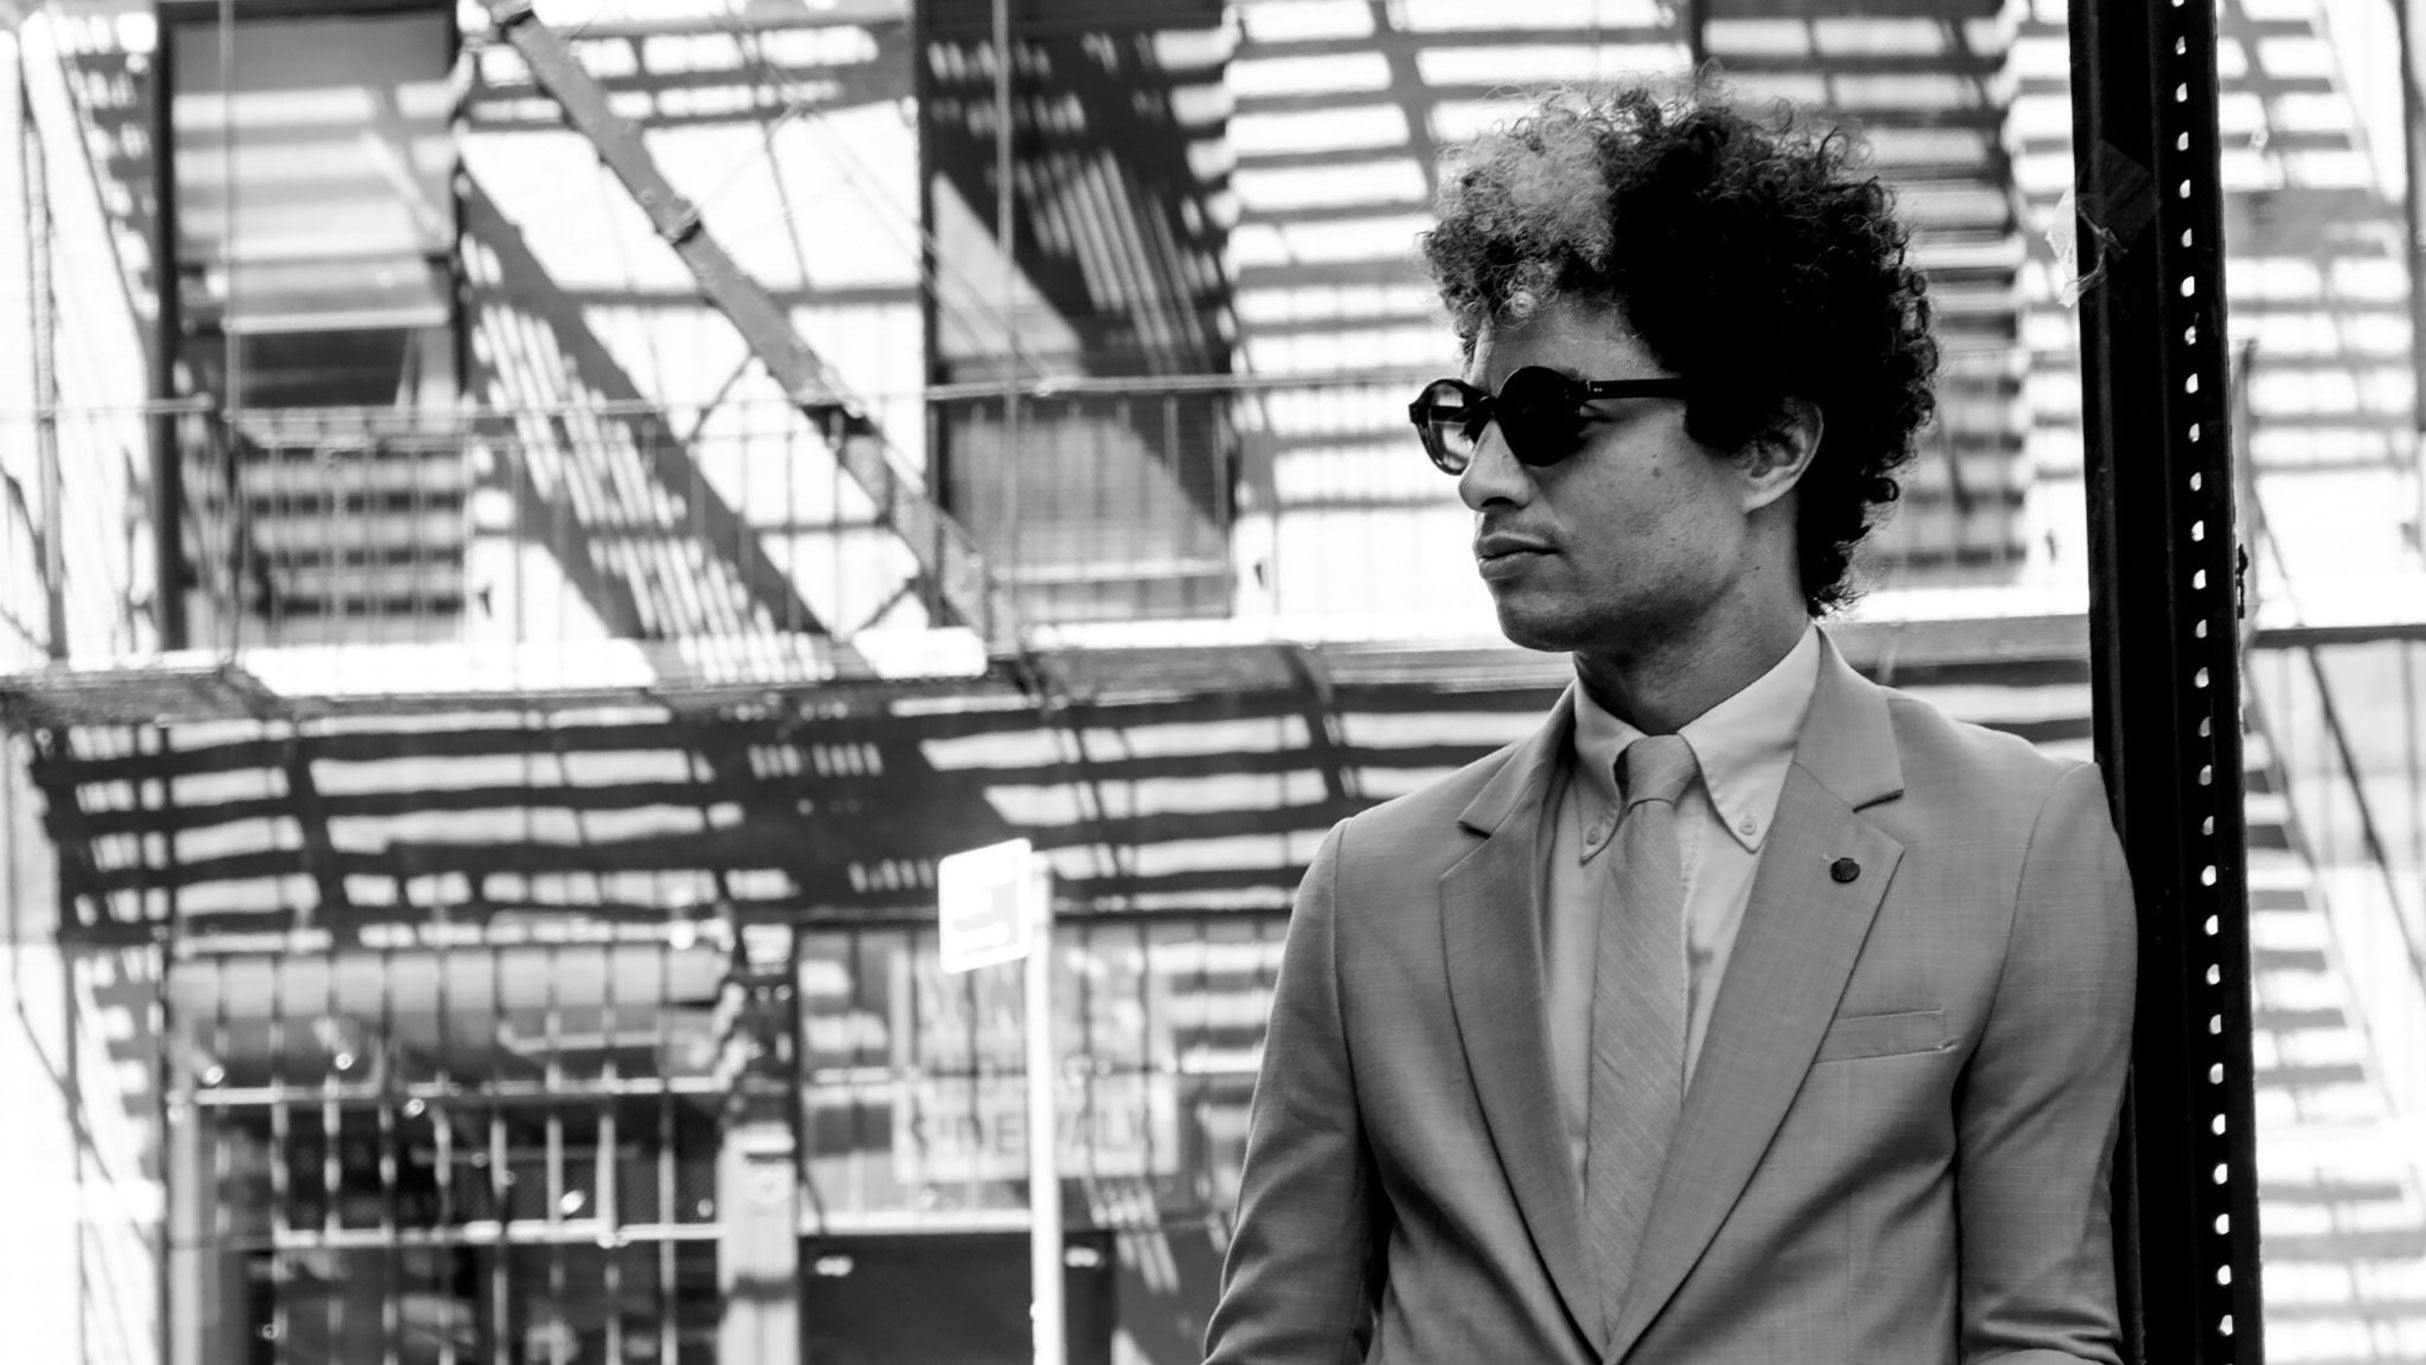 Jose James in Portsmouth event information